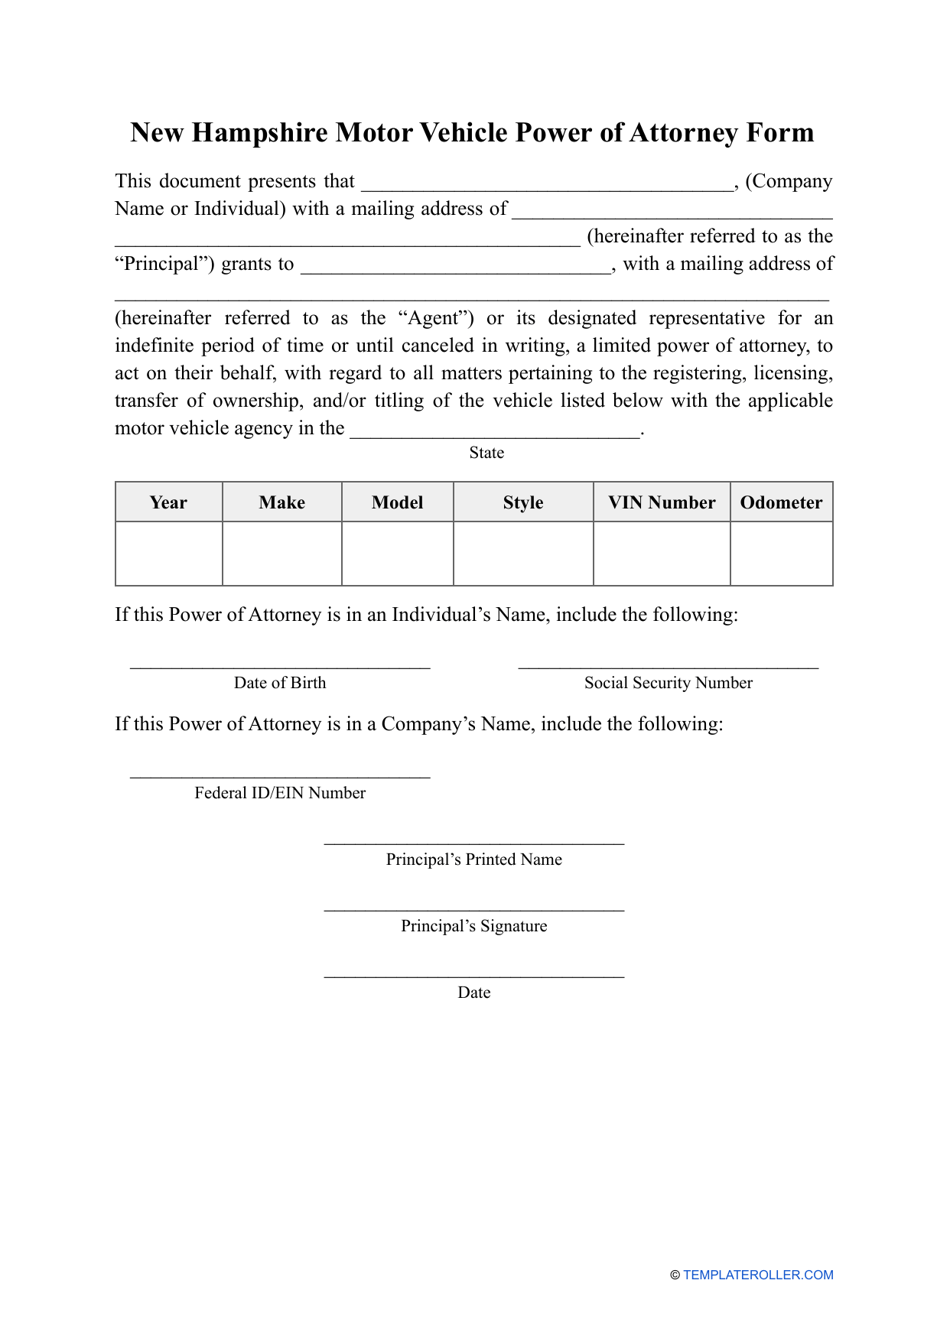 Motor Vehicle Power of Attorney Form - New Hampshire, Page 1